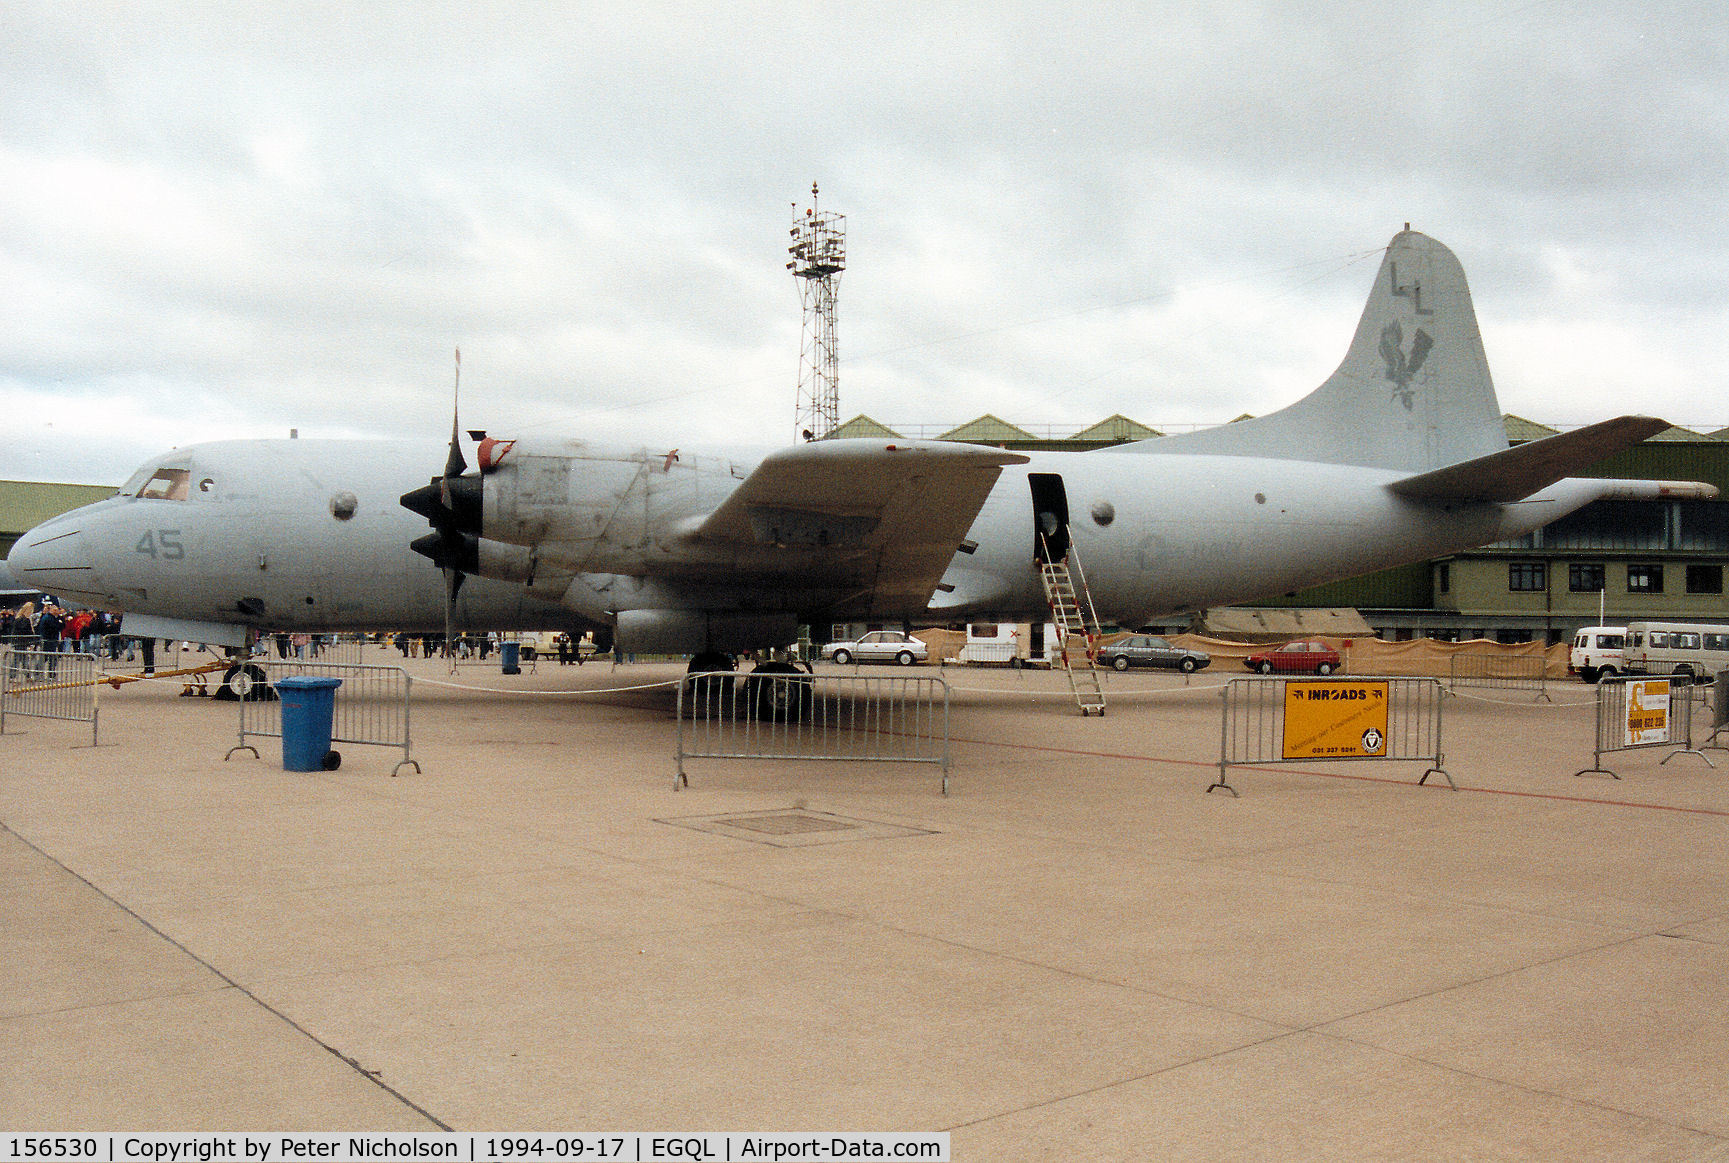 156530, Lockheed P-3C Orion C/N 285A-5524, P-3C Orion of Patrol Squadron VP-30 based at NAS Jacksonville on display at the 1994 RAF Leuchars Airshow.